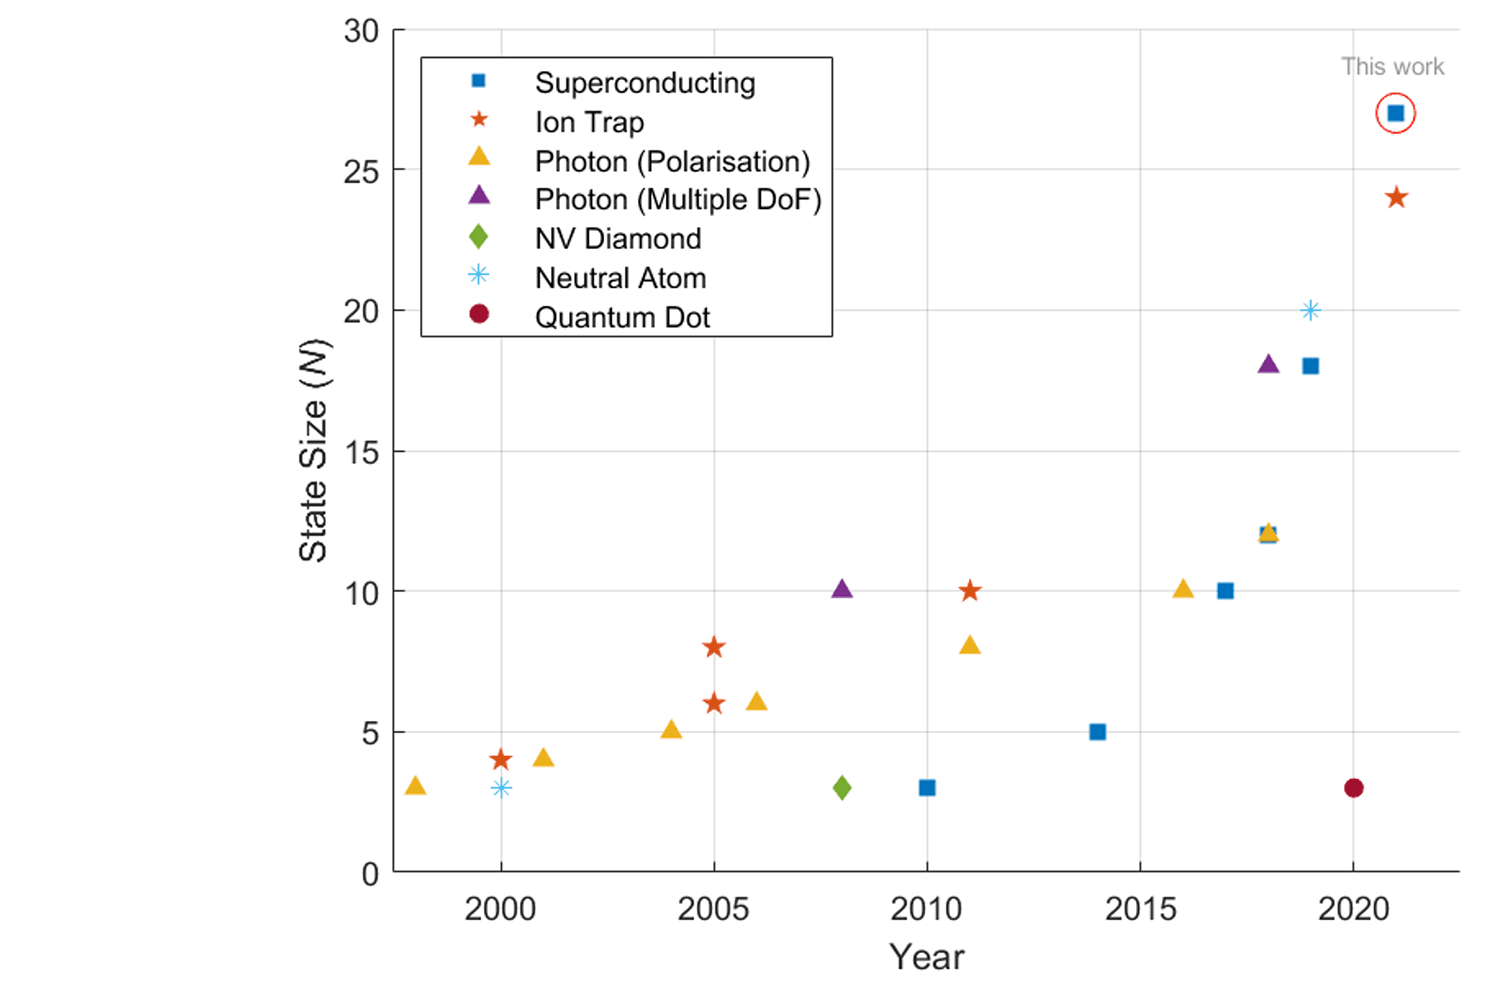 Graph showing some of the significant results for genuine multipartite entanglement for three or more qubits across different platforms in recent years.